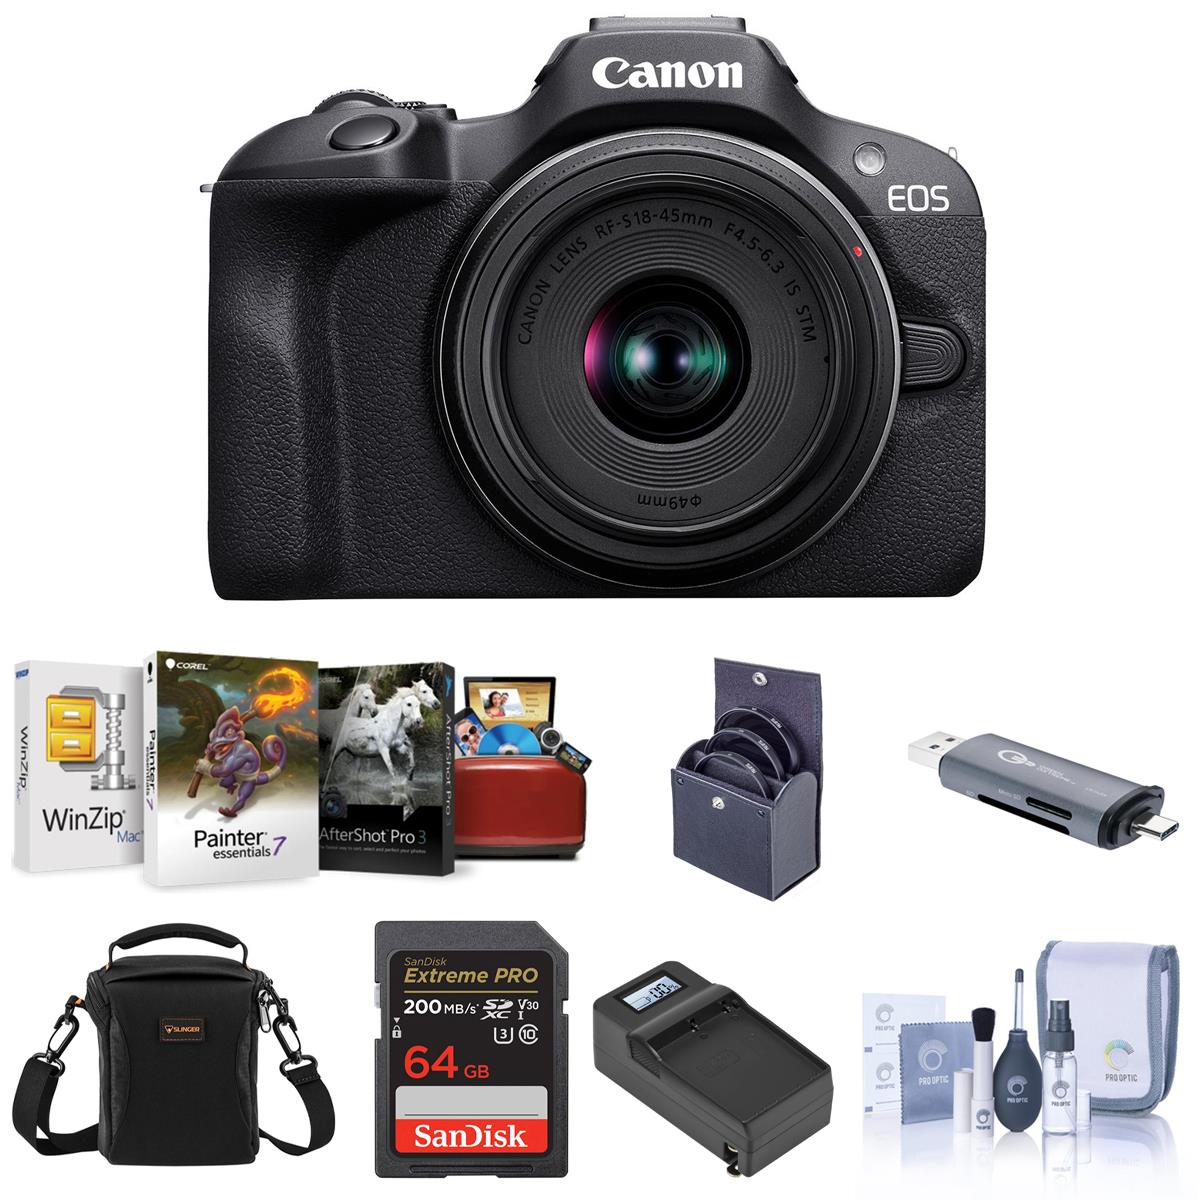 Canon EOS R100 Mirrorless Camera & RF-S 18-45mm f/4.5-6.3 IS STM Lens w/ Accessories Kit $499 + Free Shipping